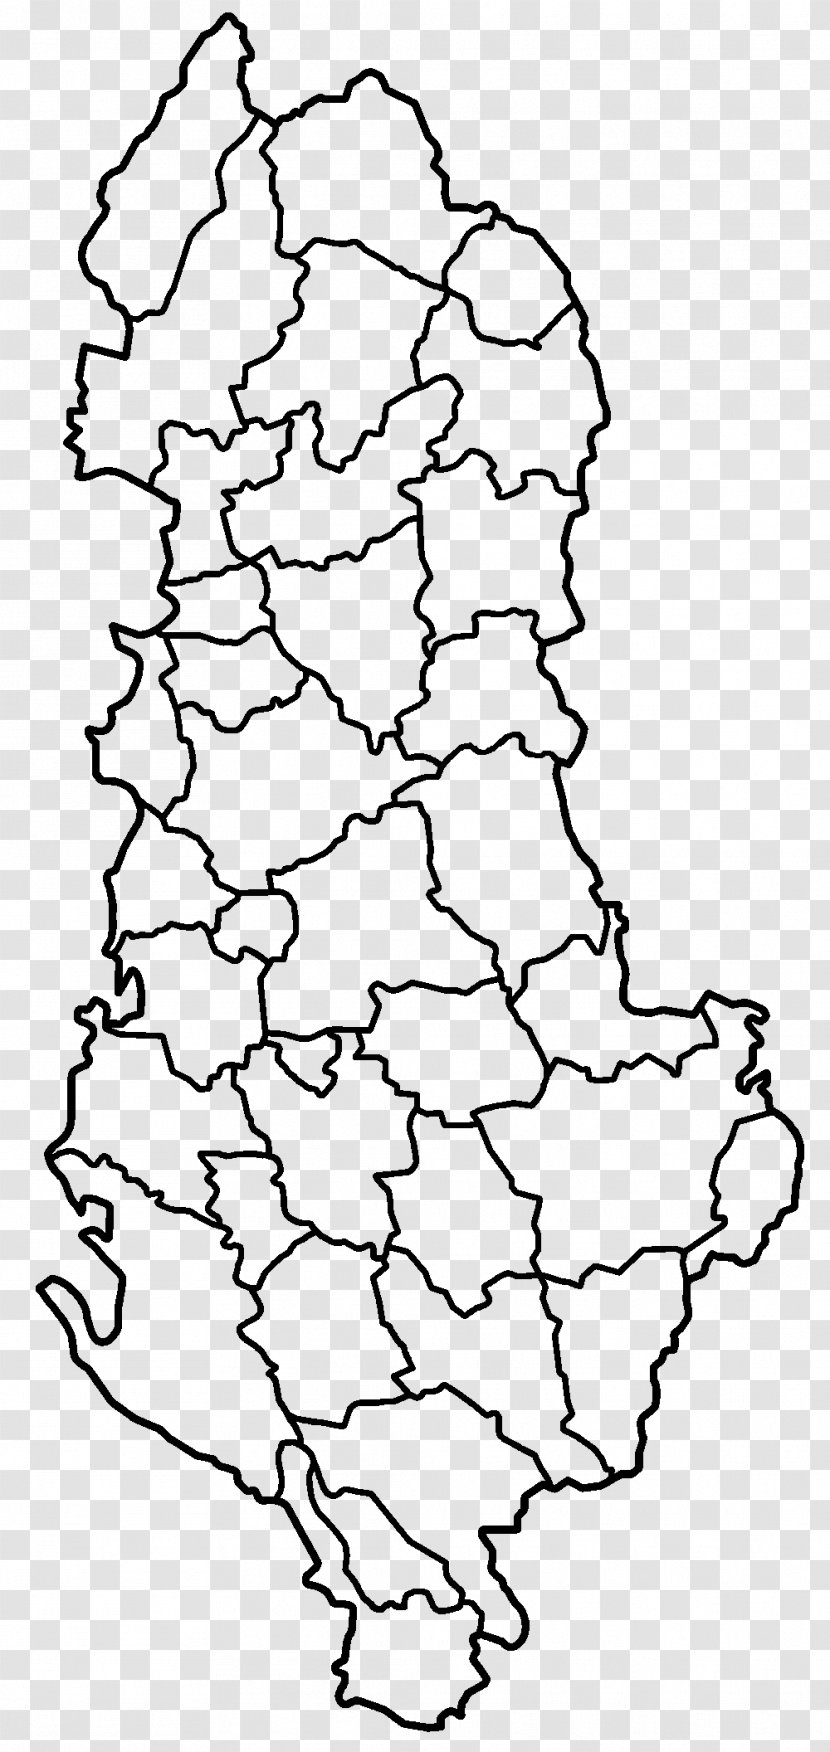 District Of Albania Wikipedia Blank Map Transparent PNG